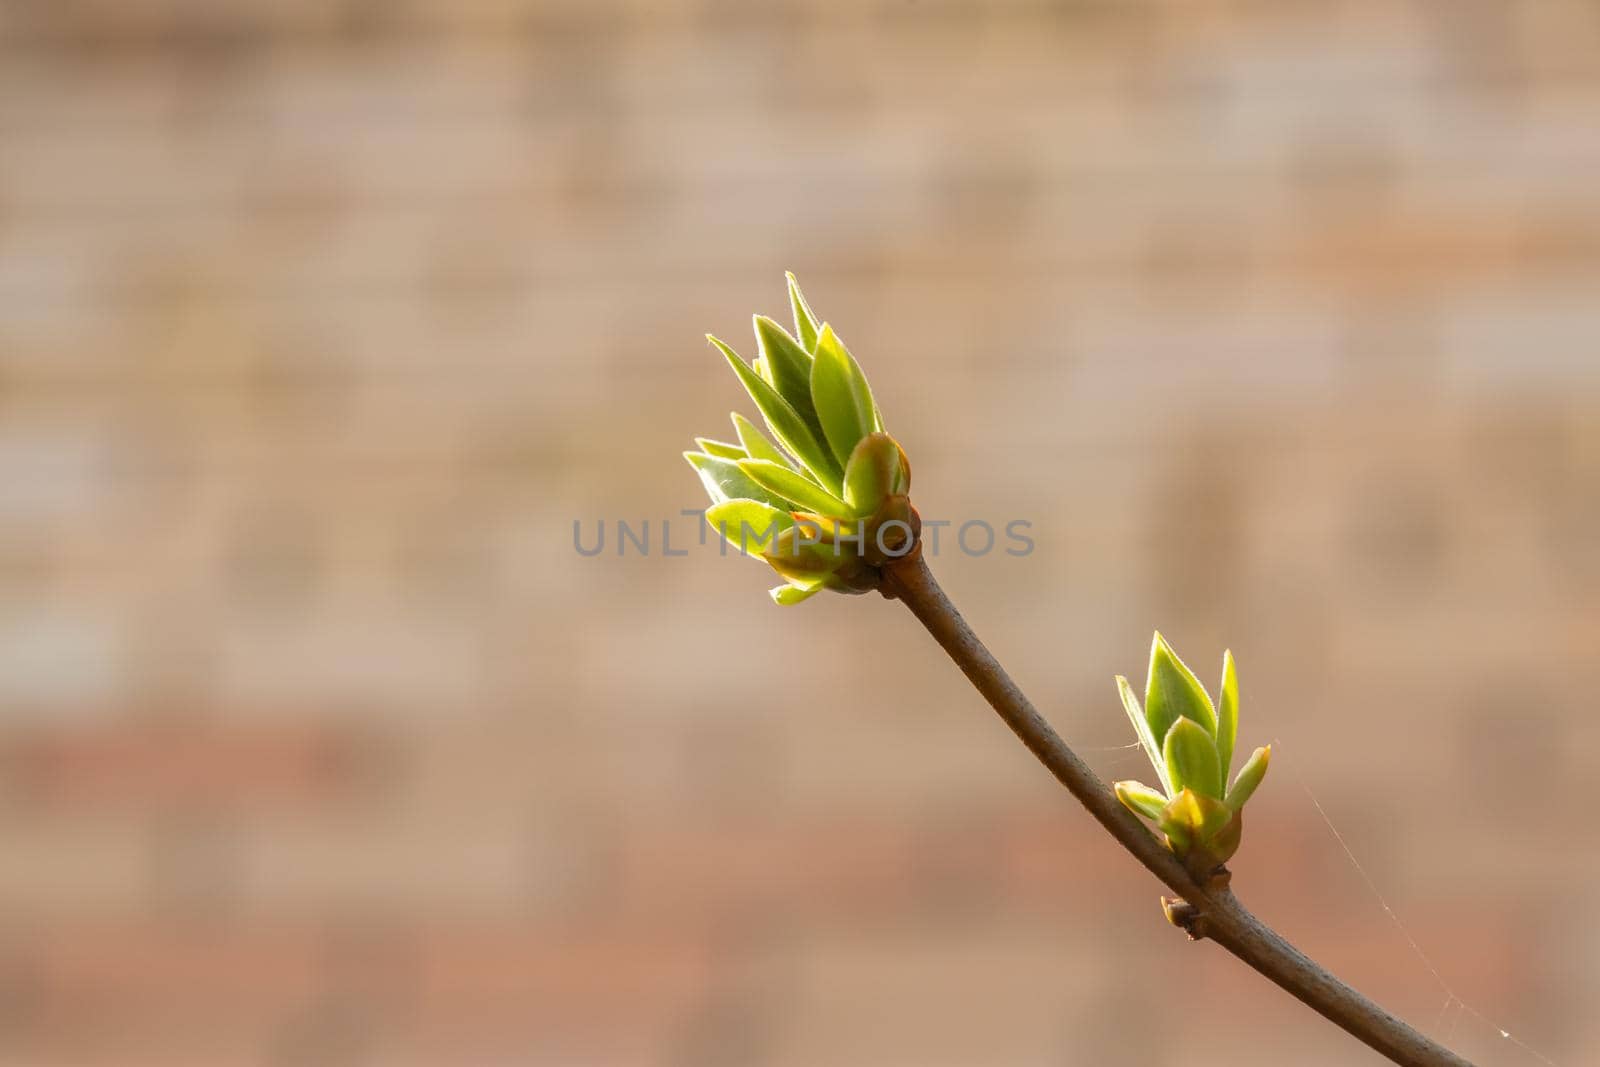 Lilac buds on a branch in early spring in March or April with sun exposure horizontal format with copy space. Photo of a reviving blossoming nature